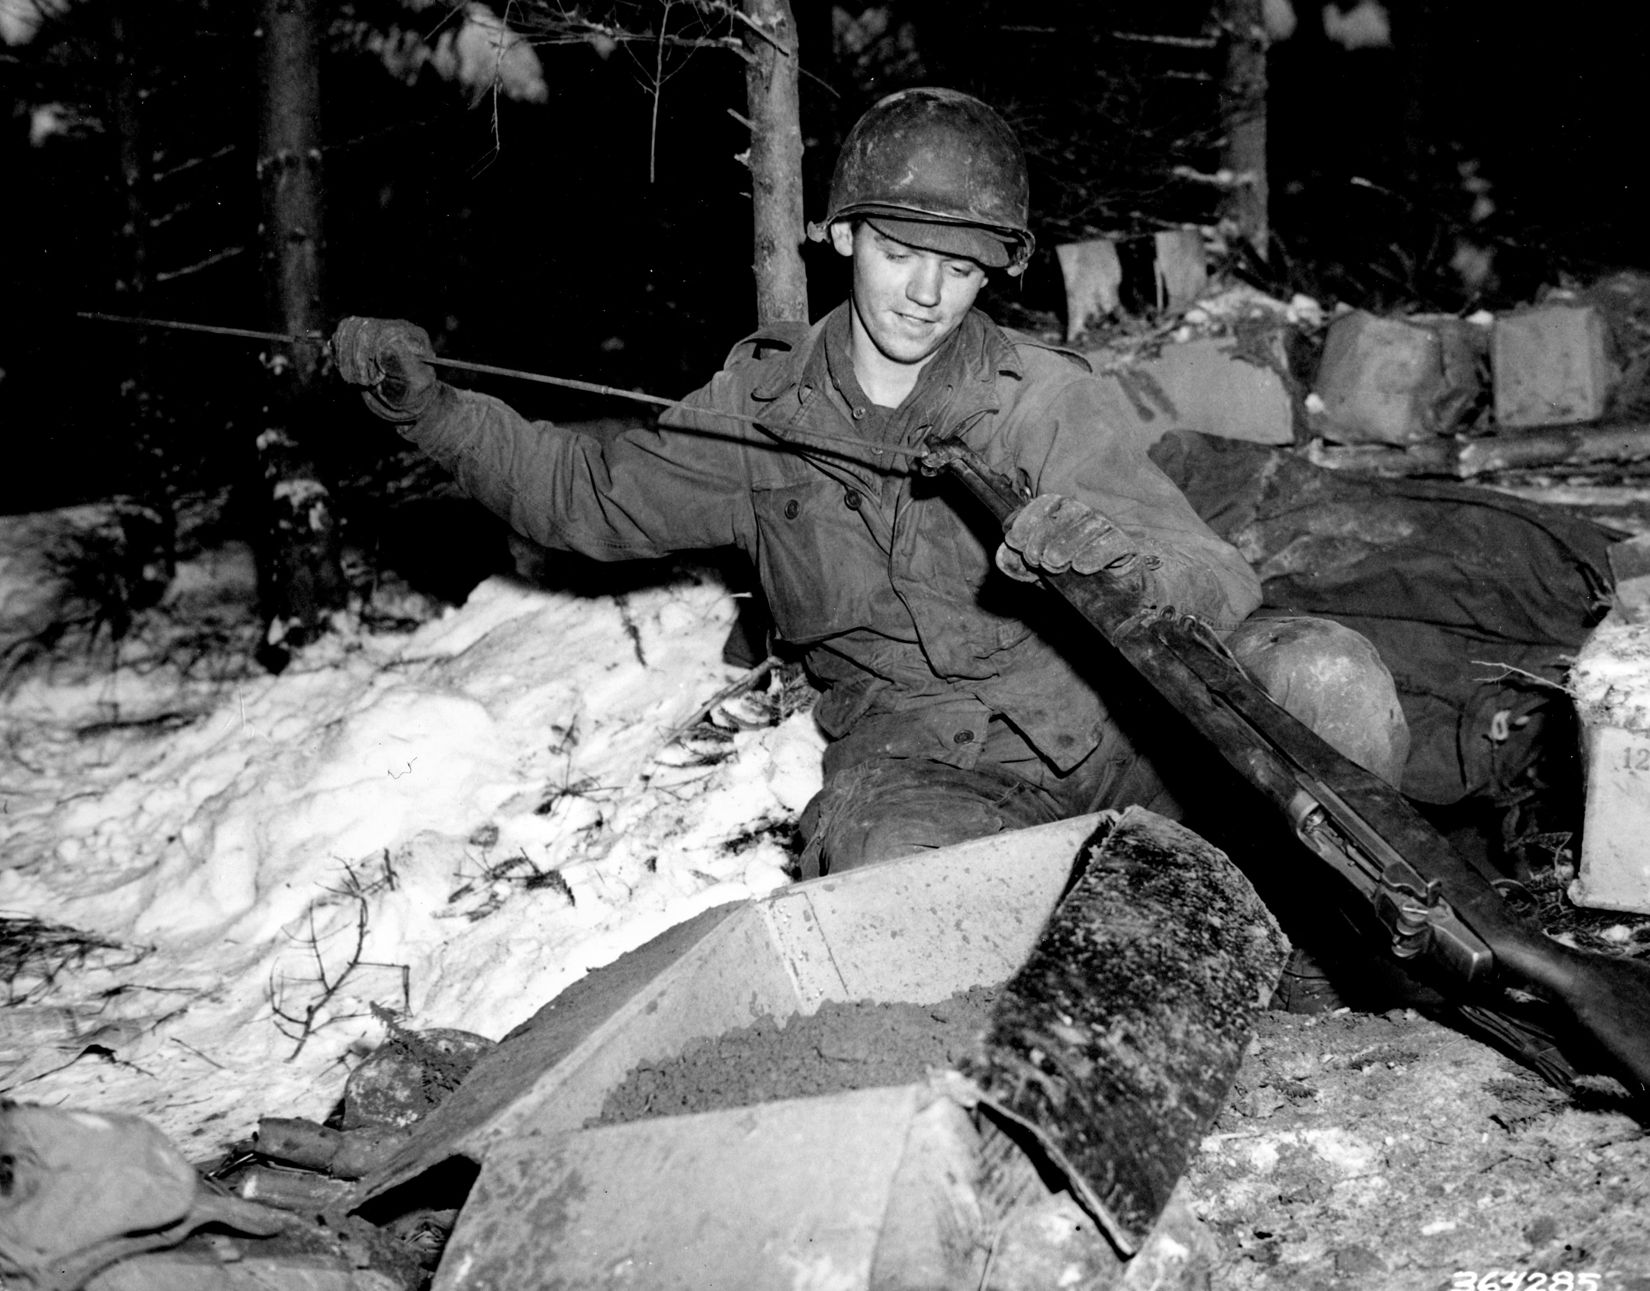 Surrounded by snow, Private First Class William Ottersbach of the 101st cleans his rifle near Foy, Belgium, January 11, 1945.